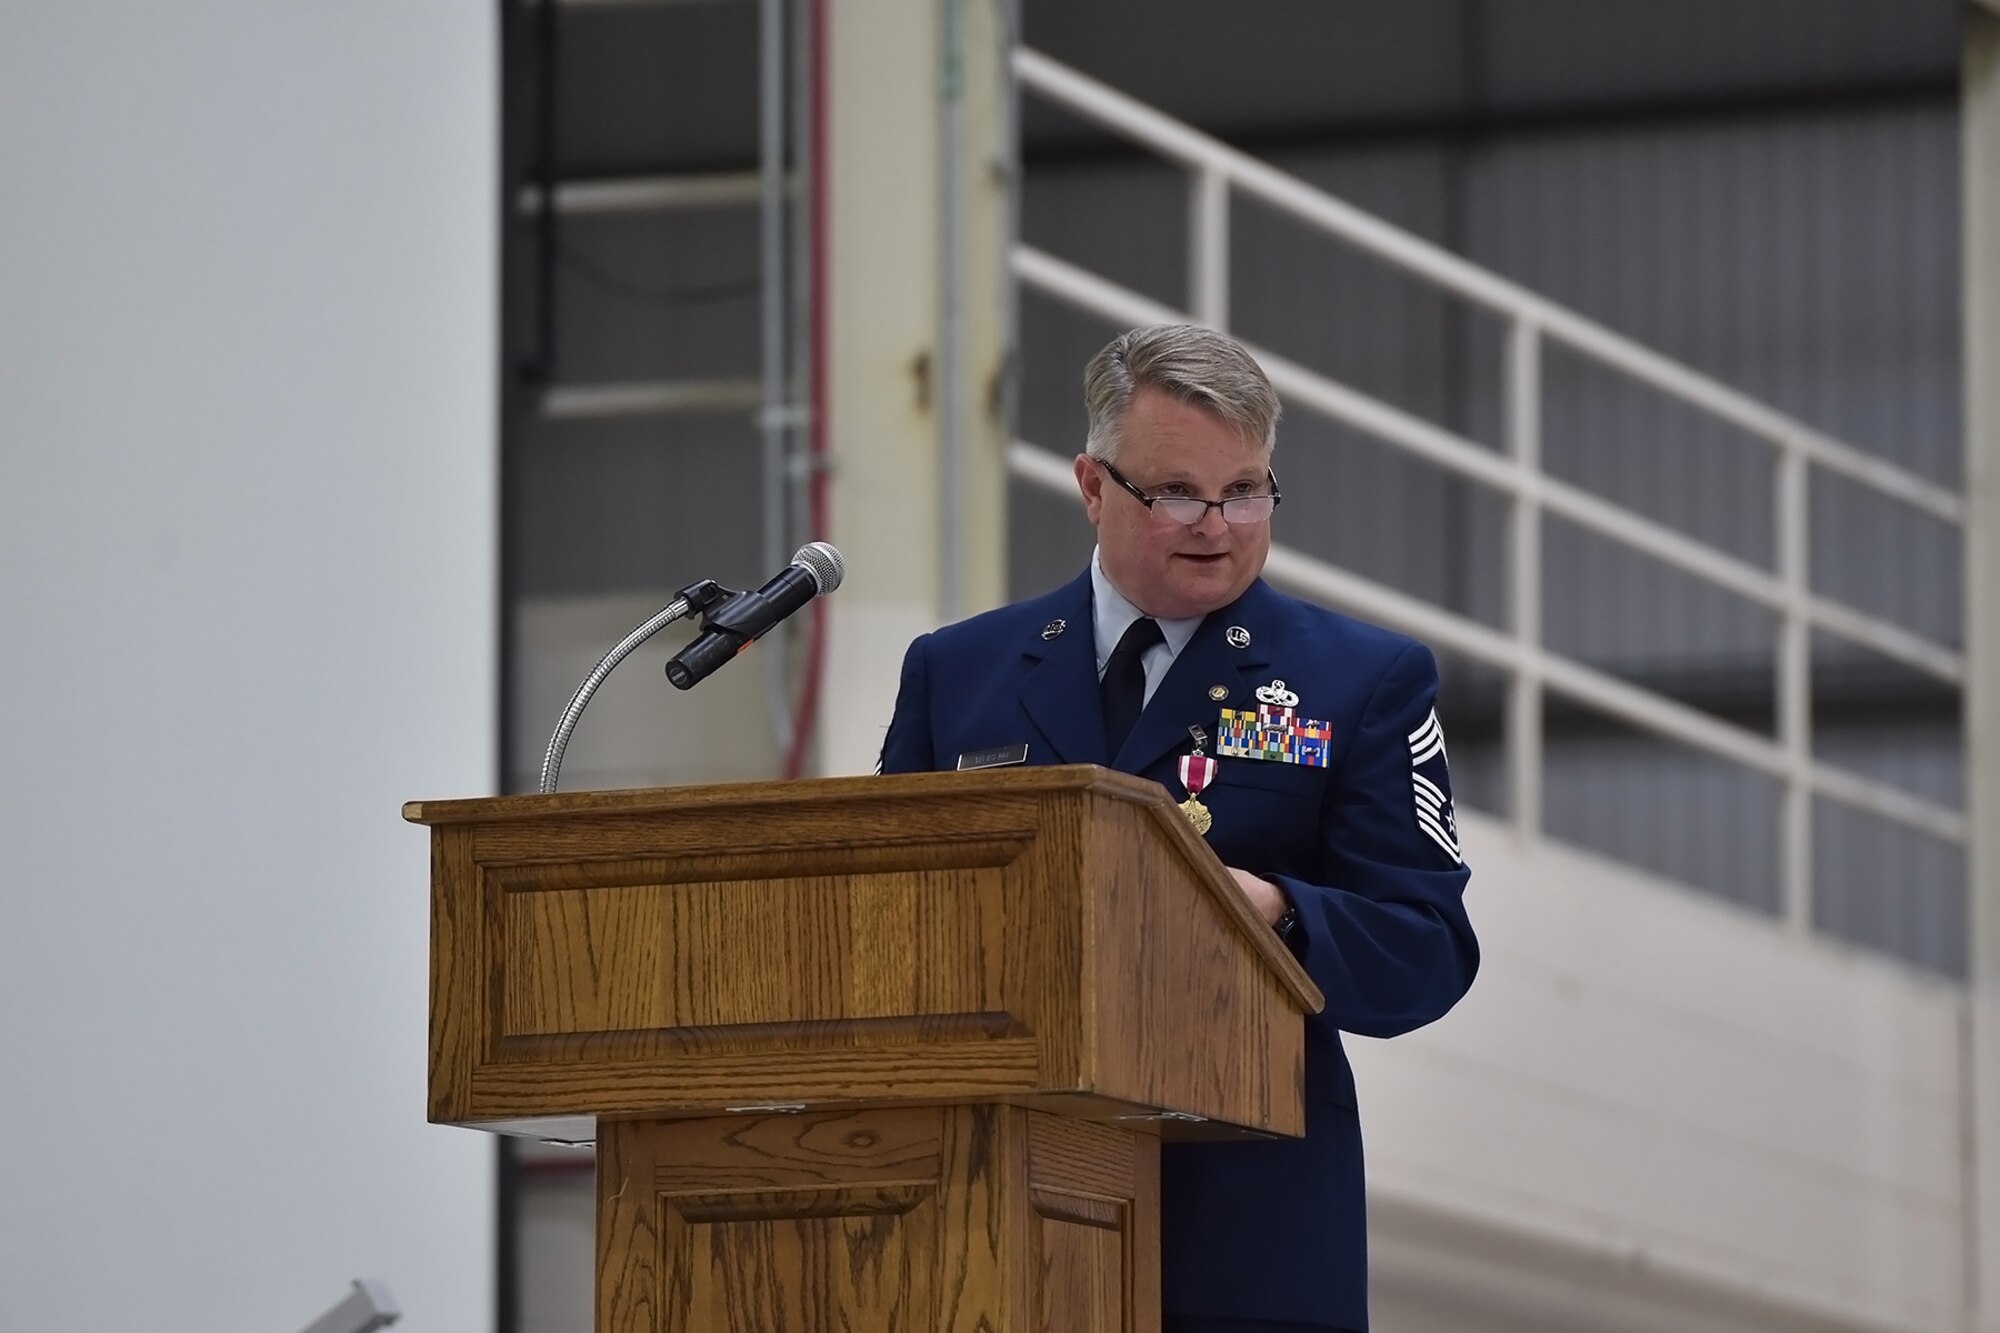 Chief Master Sgt. Chad Weisend address friends and family during his retirement ceremony held at Grissom Air Reserve Base, Ind., May 1, 2021. Weisend retired as after 36 years of service. (U.S. Air Force Photo/ Tech. Sgt. Jami K. Lancette)